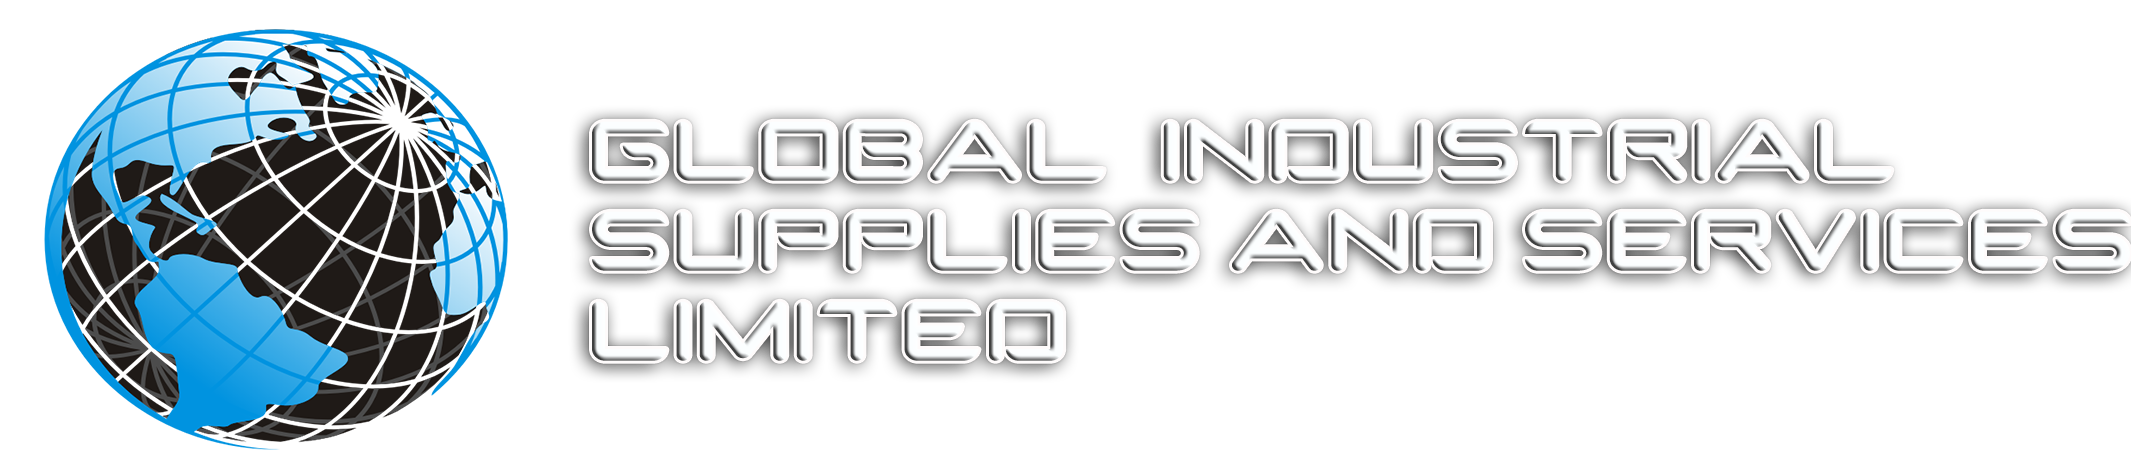 Global Industrial Supplies and Services Limited